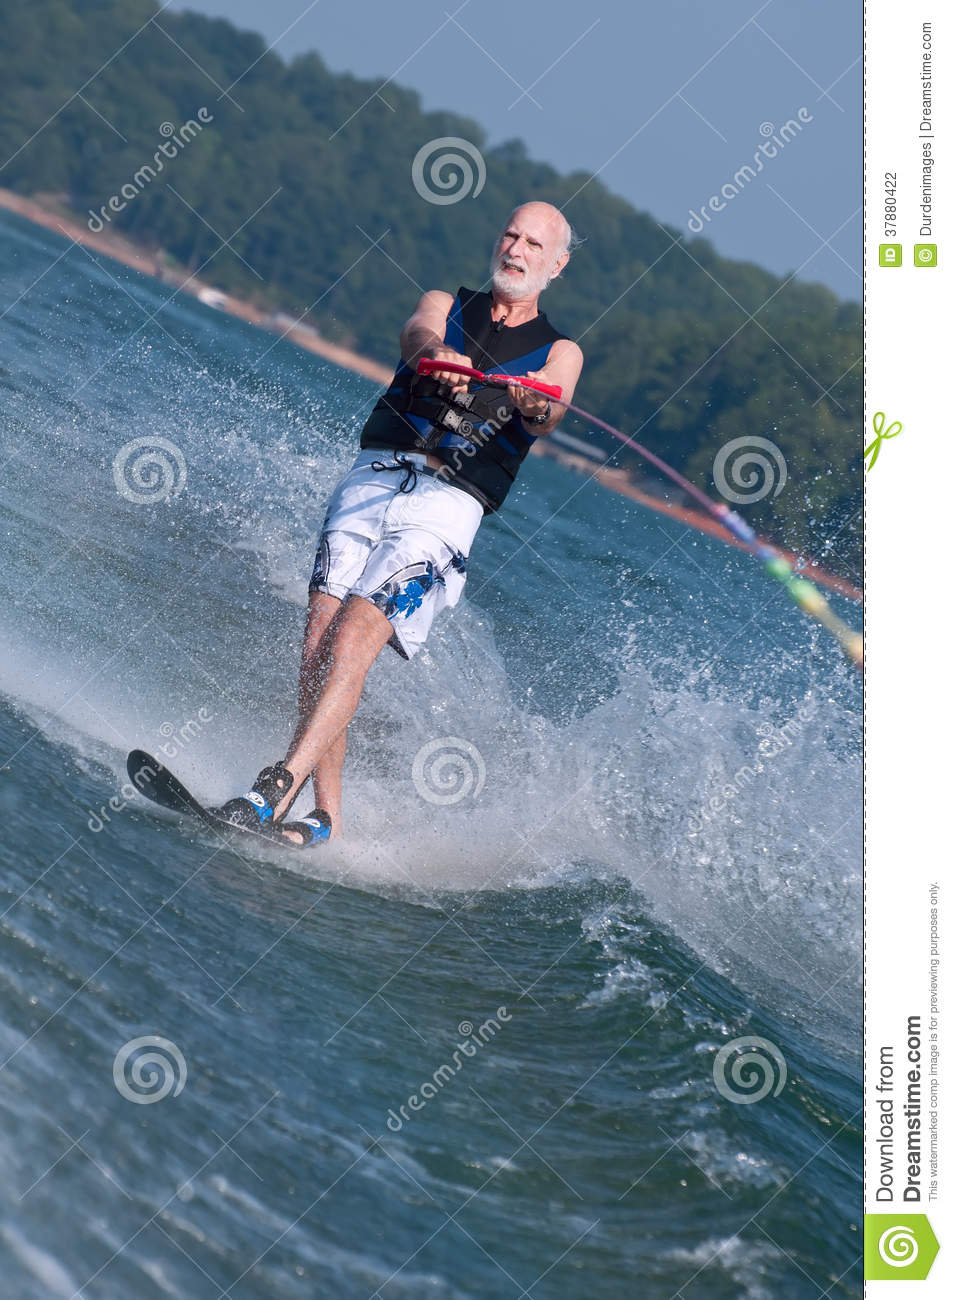 Waterski As He Carves Through The Boat Wake Creating Copious Spray